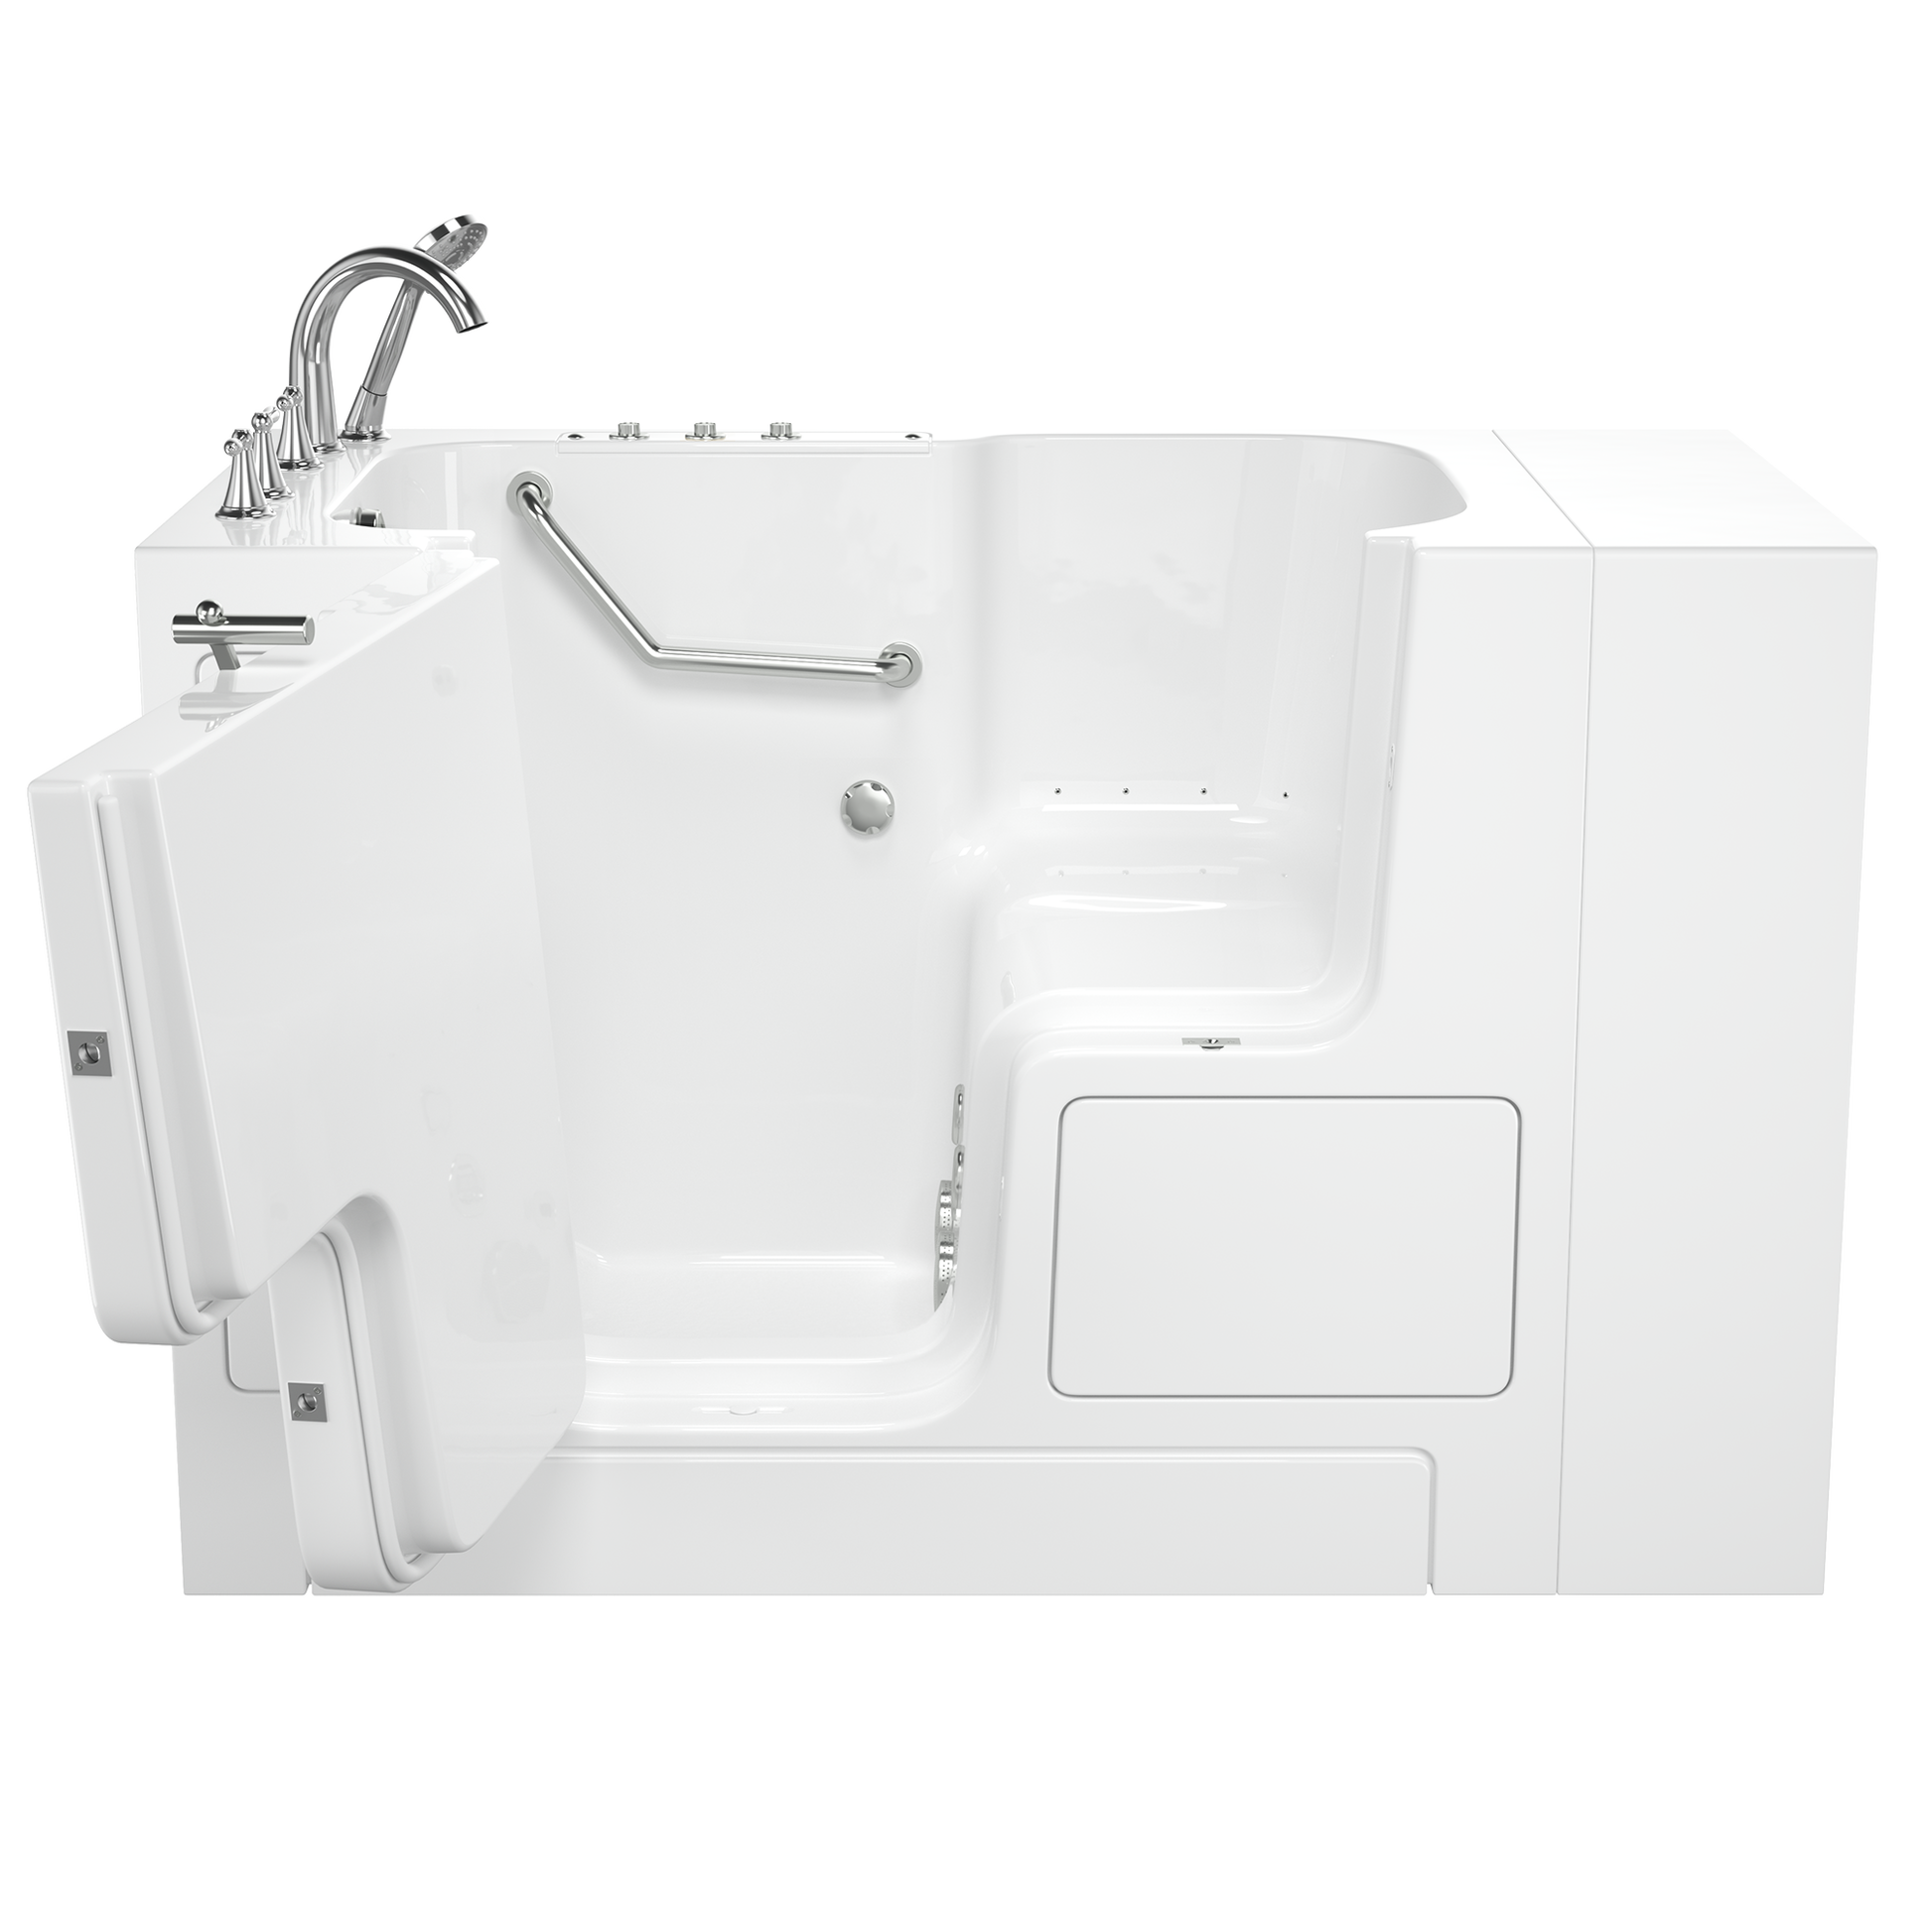 AMERICAN-STANDARD SS9OD5232LD-WH-PC, Gelcoat Premium Series 32 in. x 52 in. Outward Opening Door Walk-In Bathtub with Air Spa and Whirlpool system in Wib White